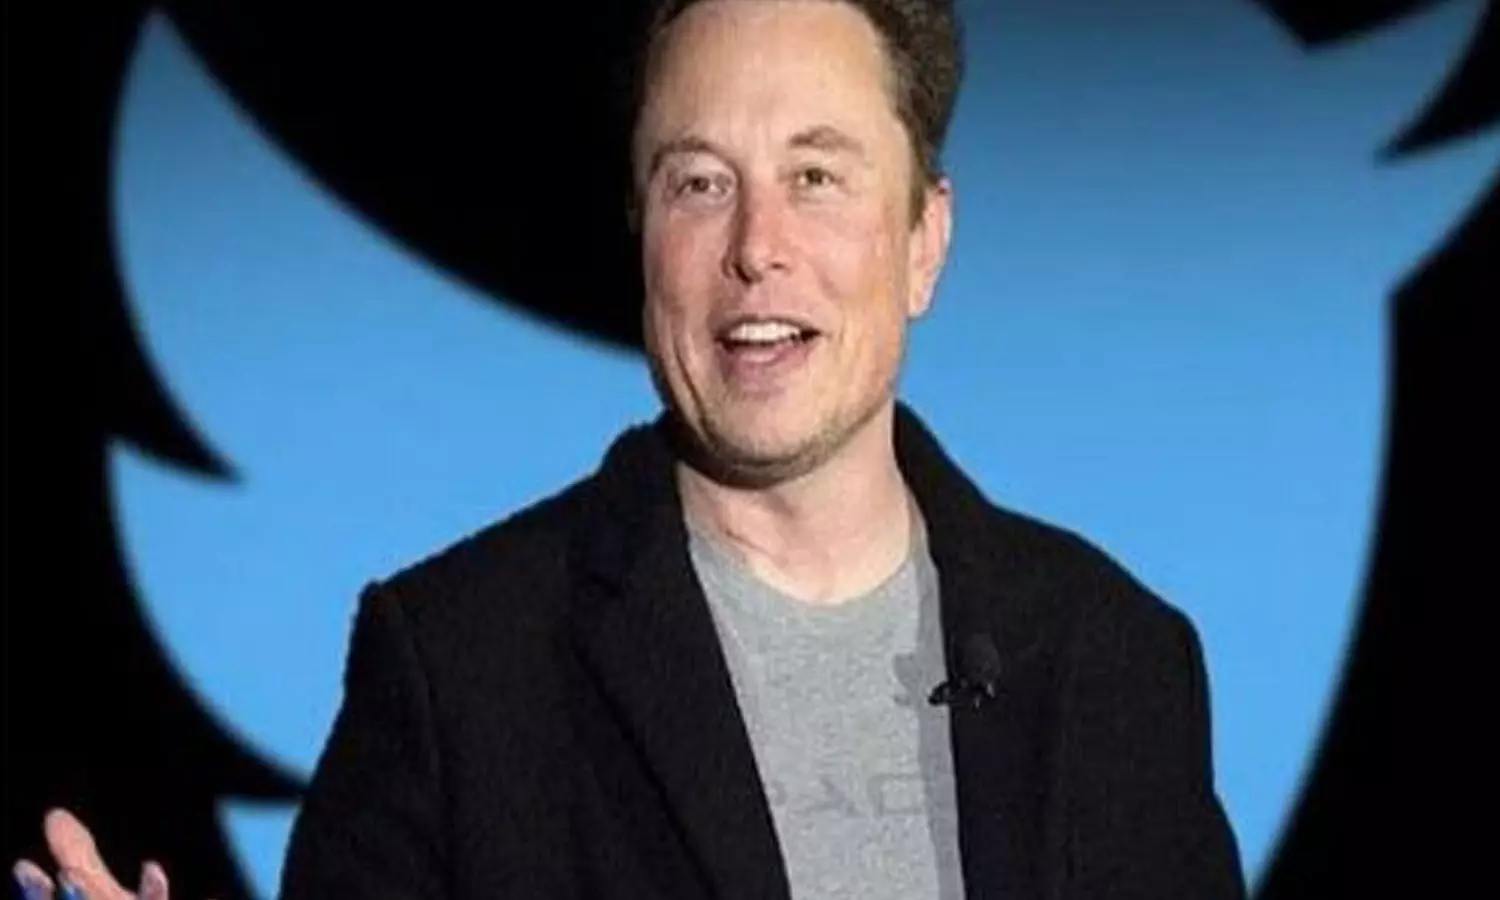 Voice, video chat on Twitter soon without phone number, announces Elon Musk